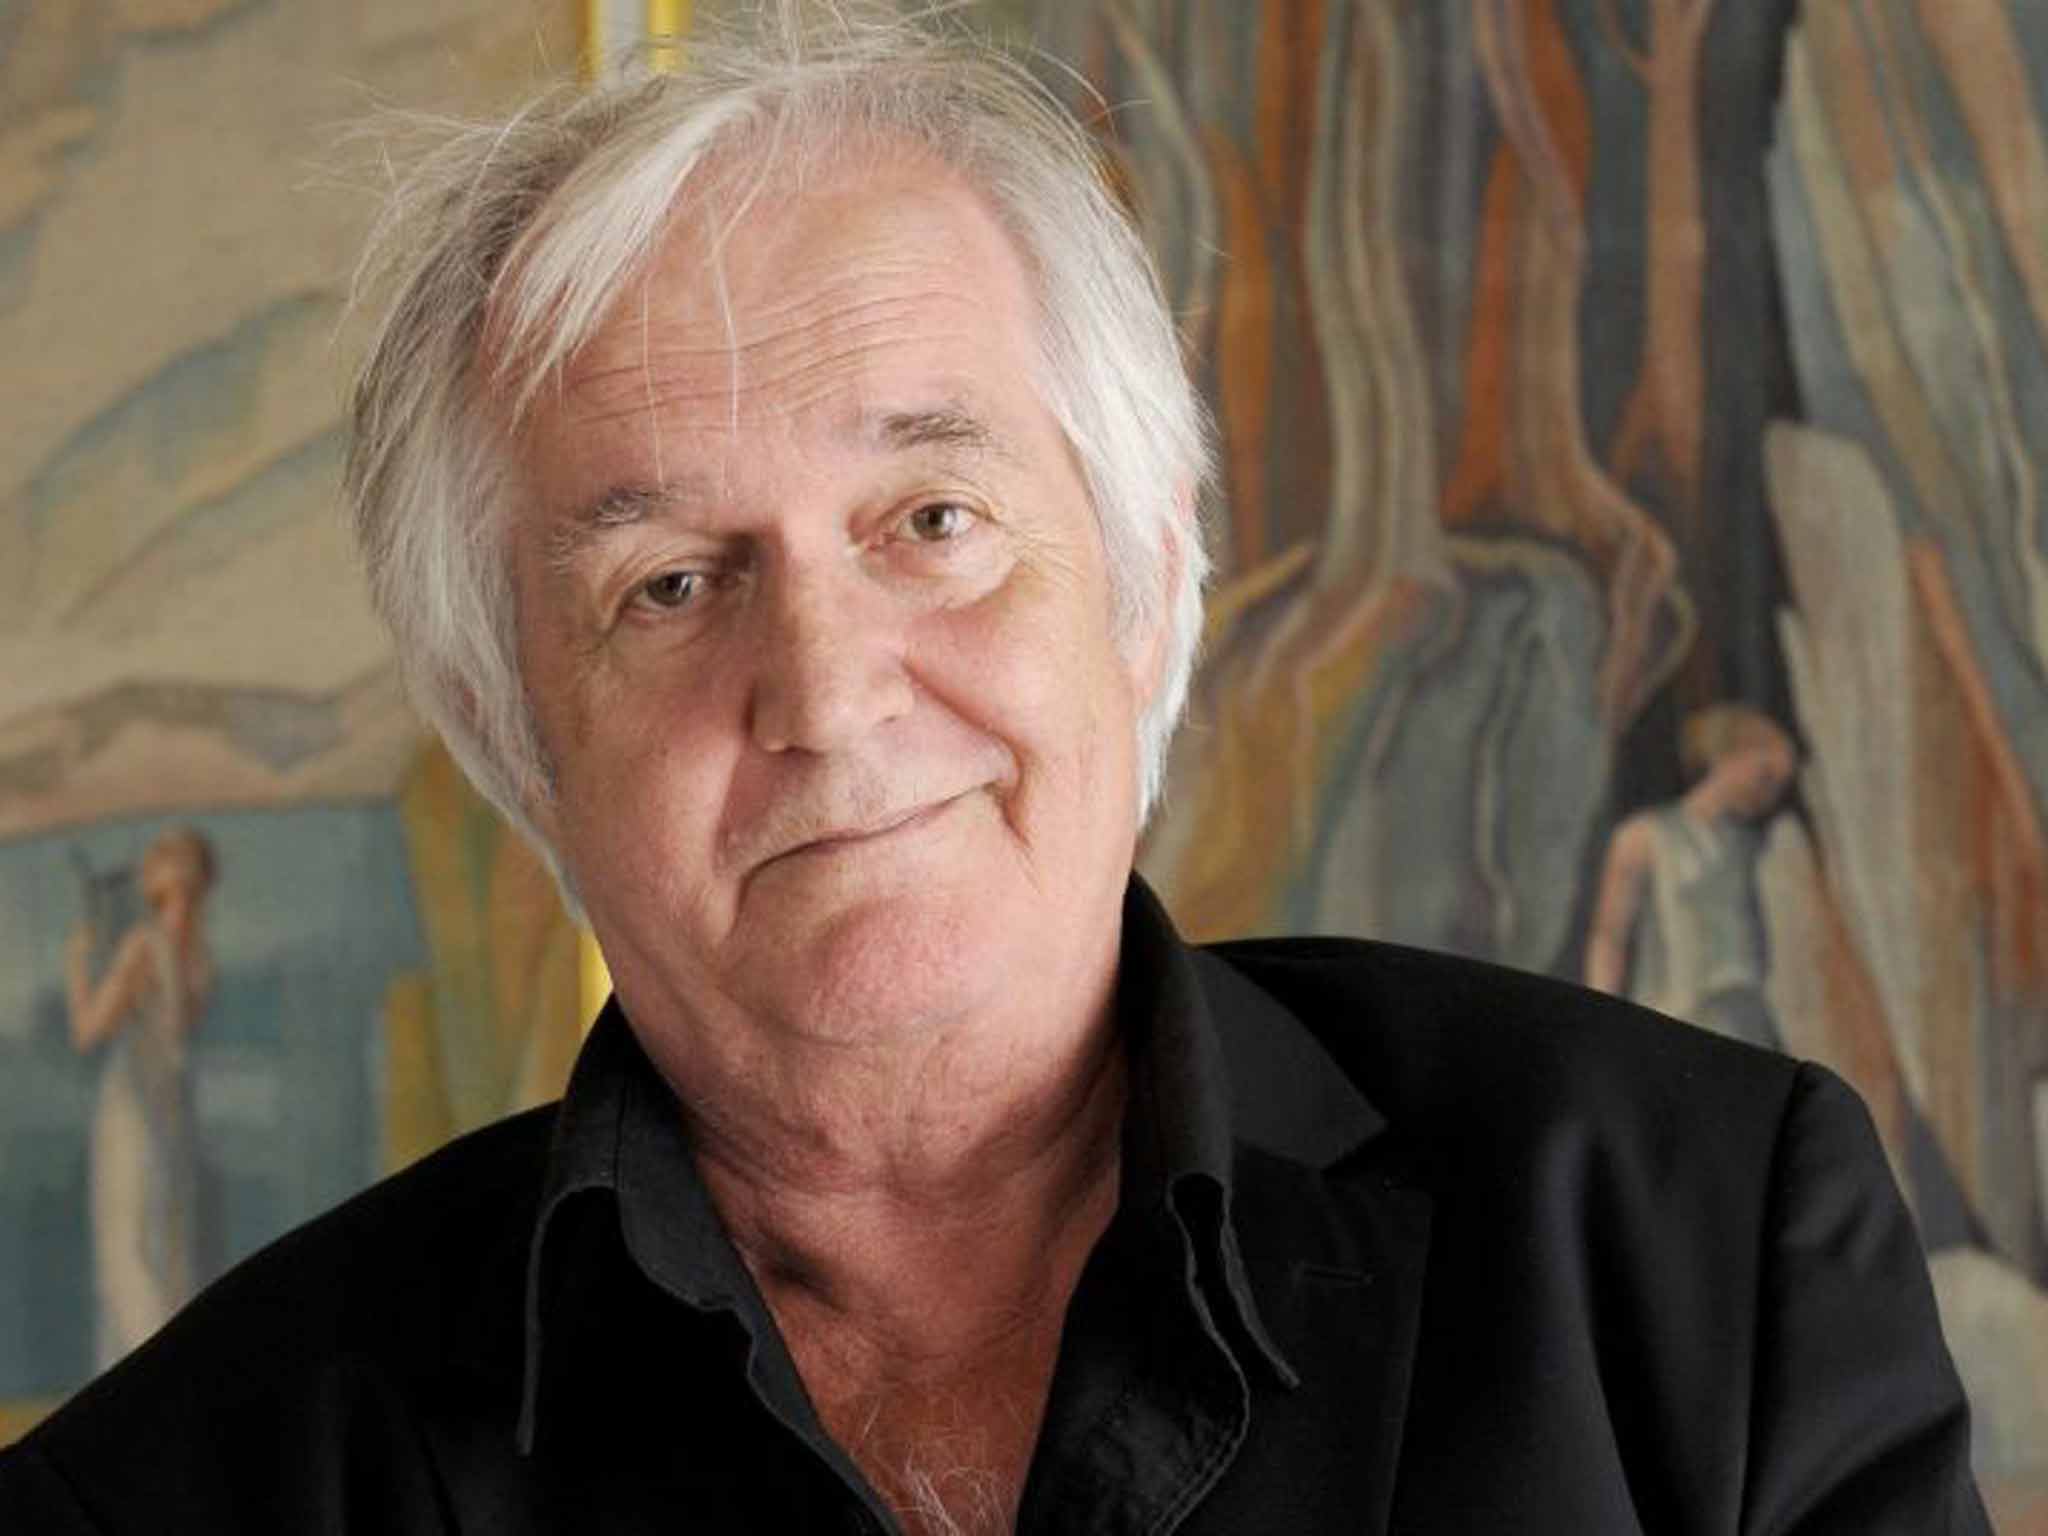 Mankell in 2009: 'If we do not have a system of justice that people believe in, the system of democracy will fail,' he said. 'This is the subtext in all of the Wallander stories.'